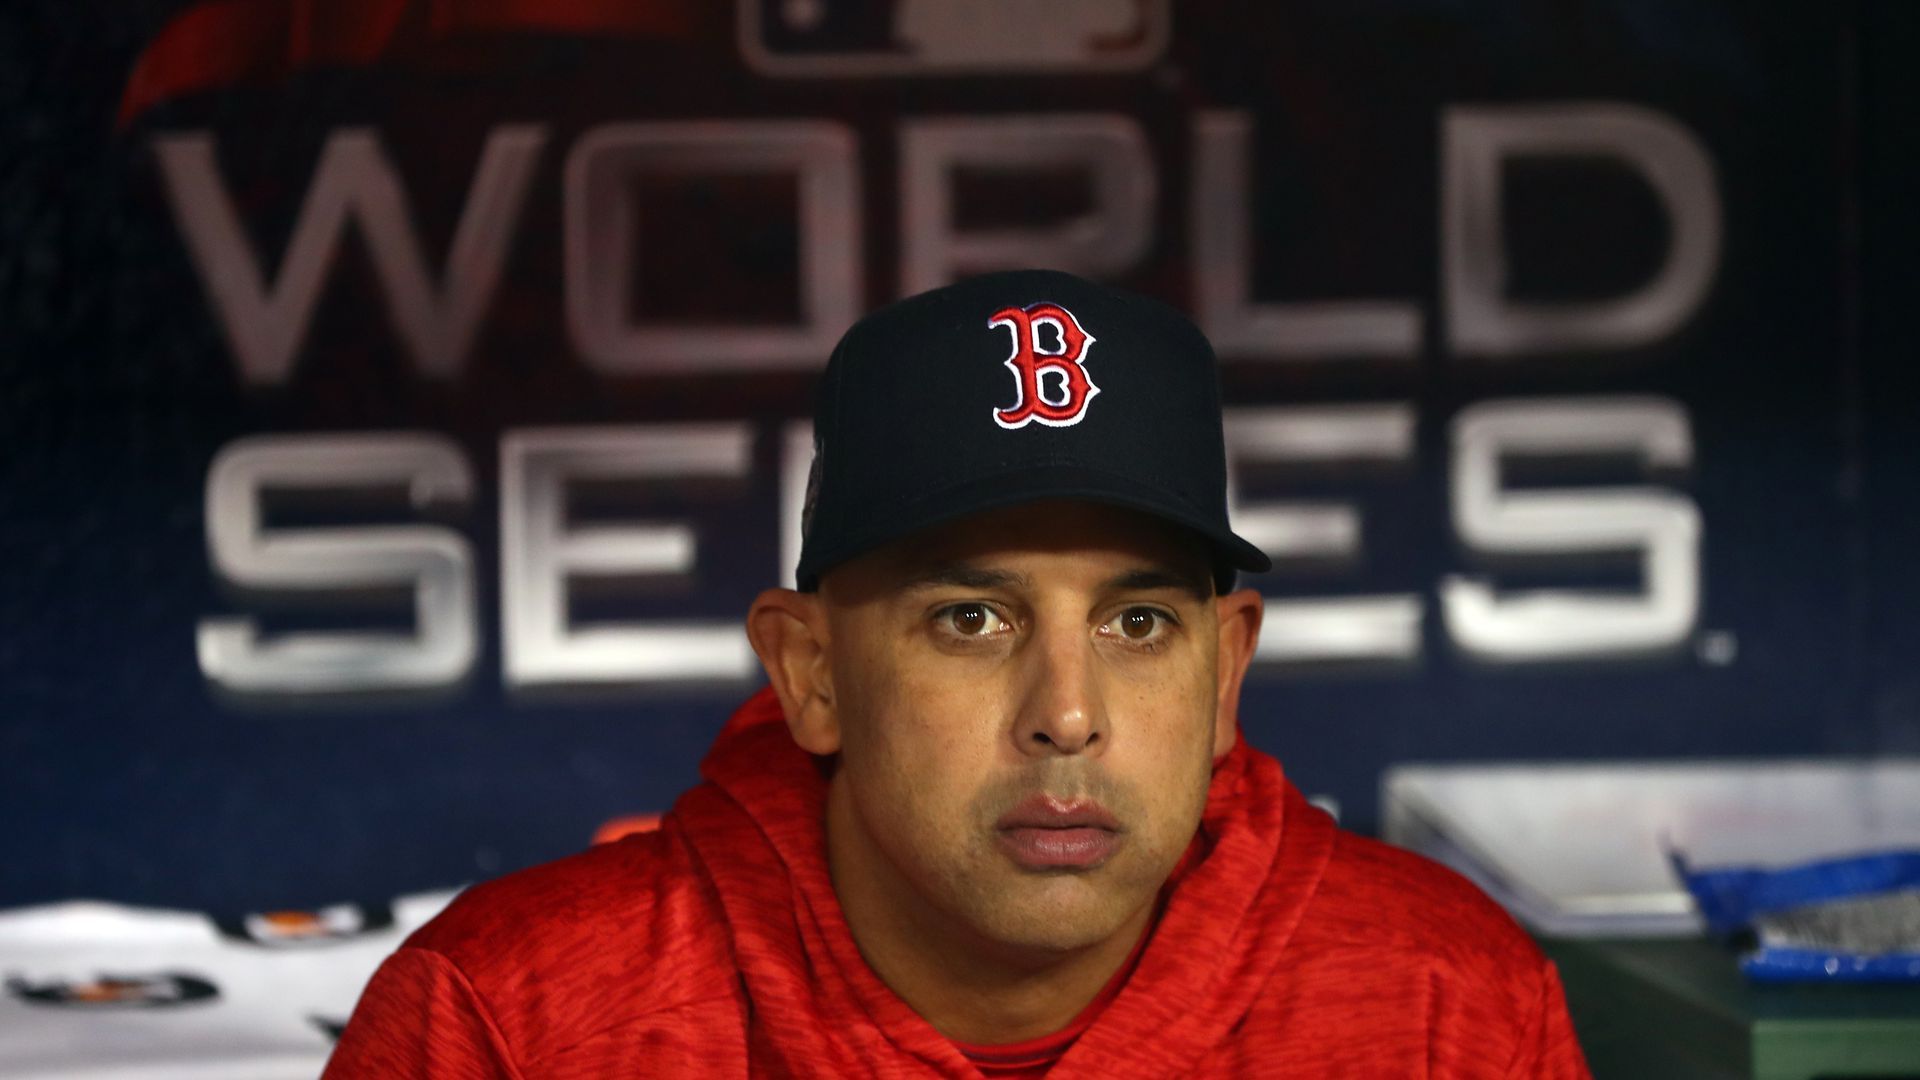 MLB sign-stealing scandal broadens with 2018 Red Sox accusations